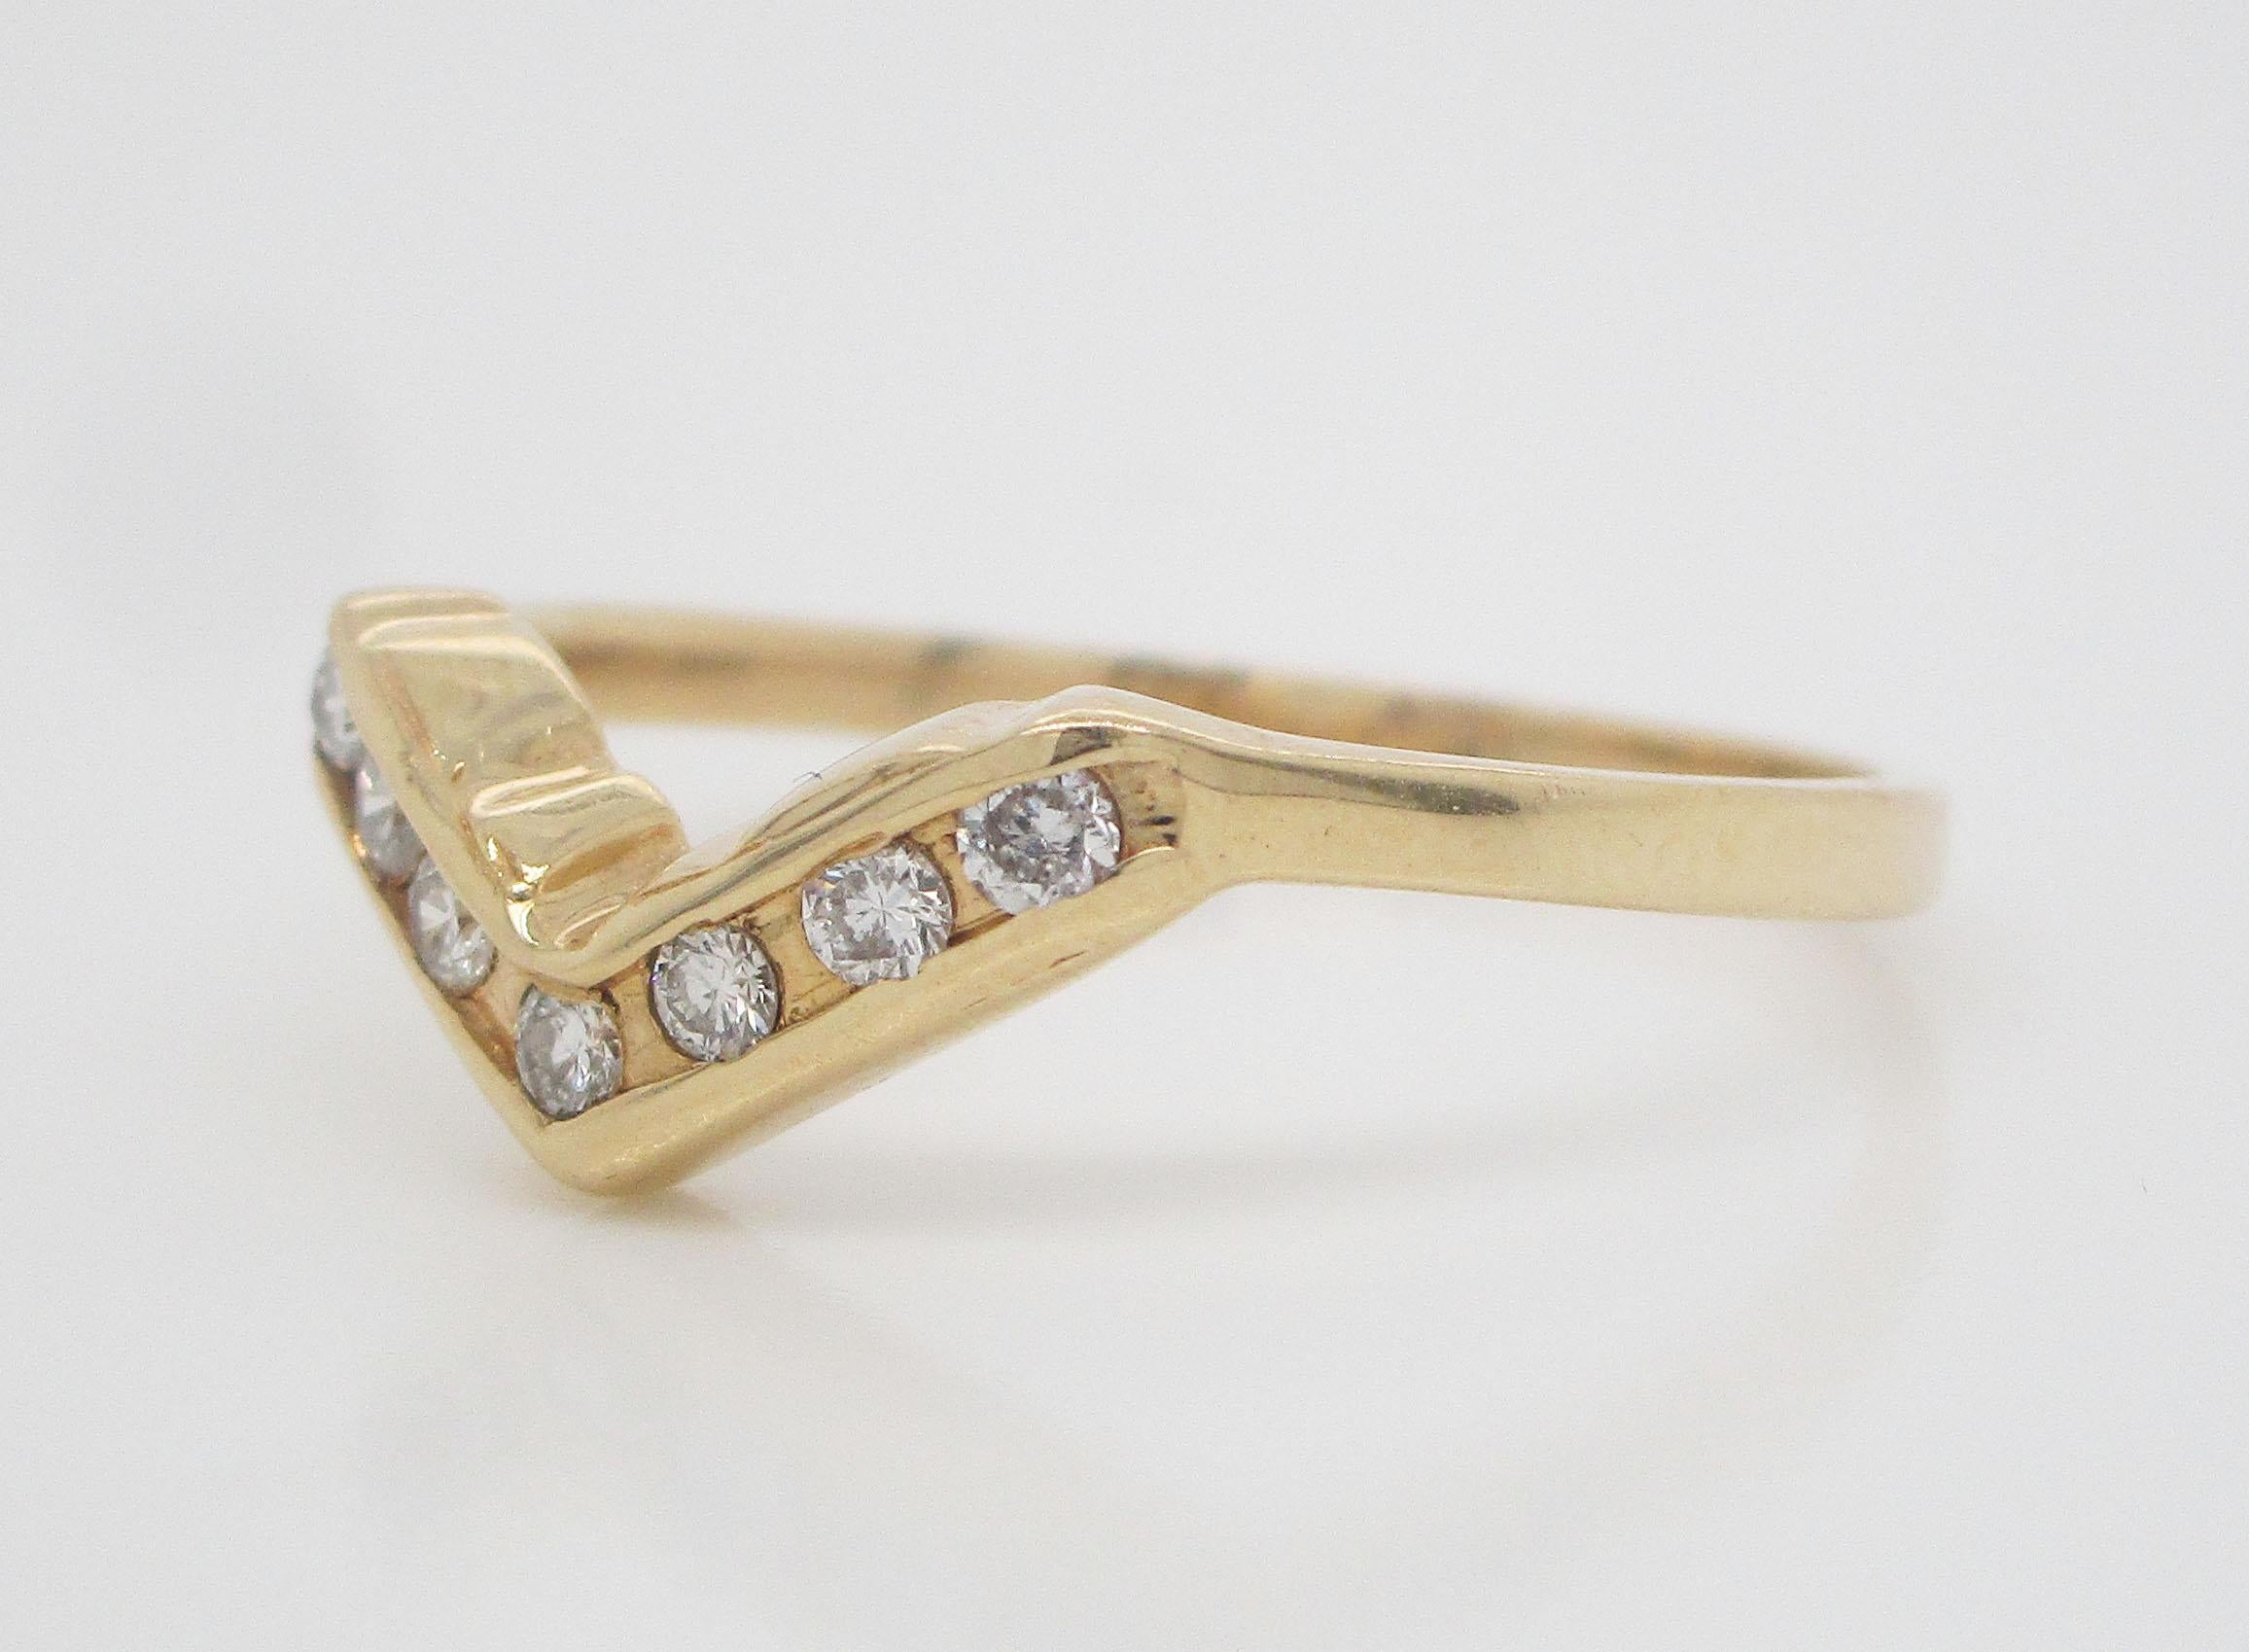 This beautiful estate ring is in 14k yellow gold and features an array of brilliant white diamonds settled into a dramatic angled layout. This band is ideal for stacking and would serve as a gorgeous wedding band if paired with an engagement ring